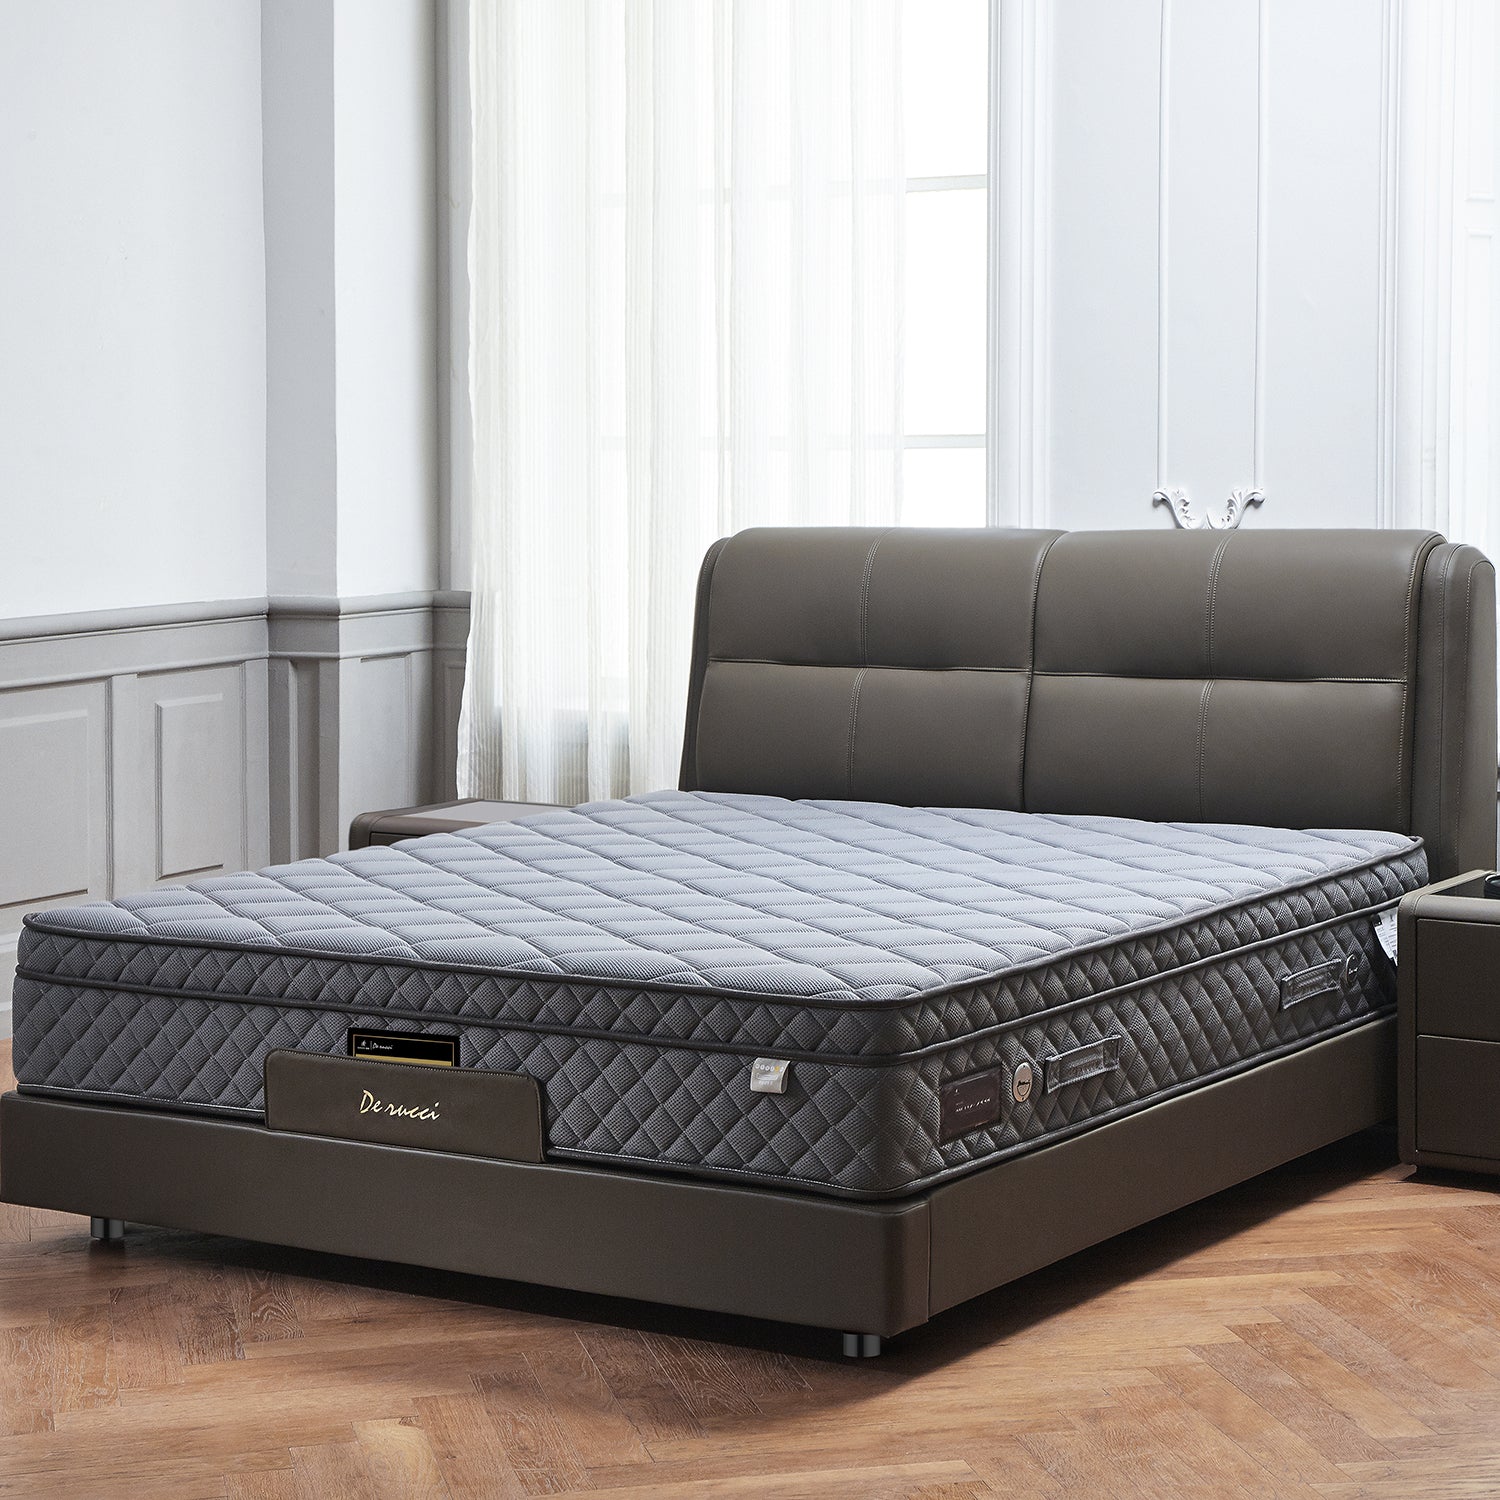 DeRUCCI Bed Frame BZZ4-243 with minimalist design, featuring a dark grey leather upholstered headboard and a quilted mattress, placed in a room with light walls and wooden flooring.